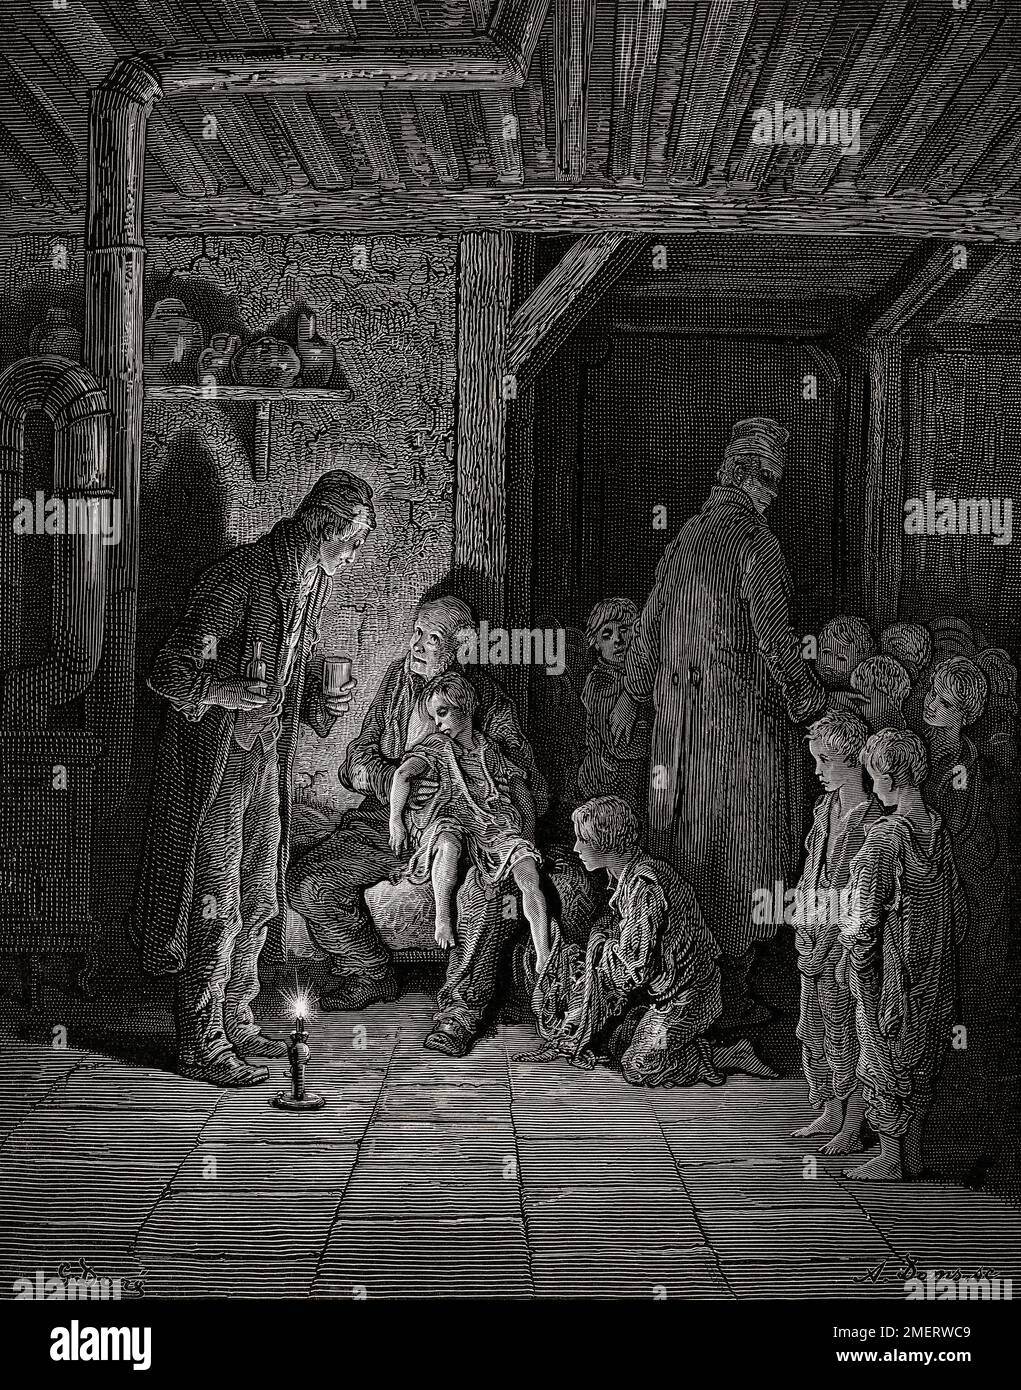 Homeless children in 19th century London.  An old man comforts a child at a refuge for abandoned children.  Another man ushers concerned children away from the scene.  After an illustration by Gustave Doré in the 1890 American edition of London: A Pilgrimage written by Blanchard Jerrold and illustrated by Gustave Doré. Stock Photo